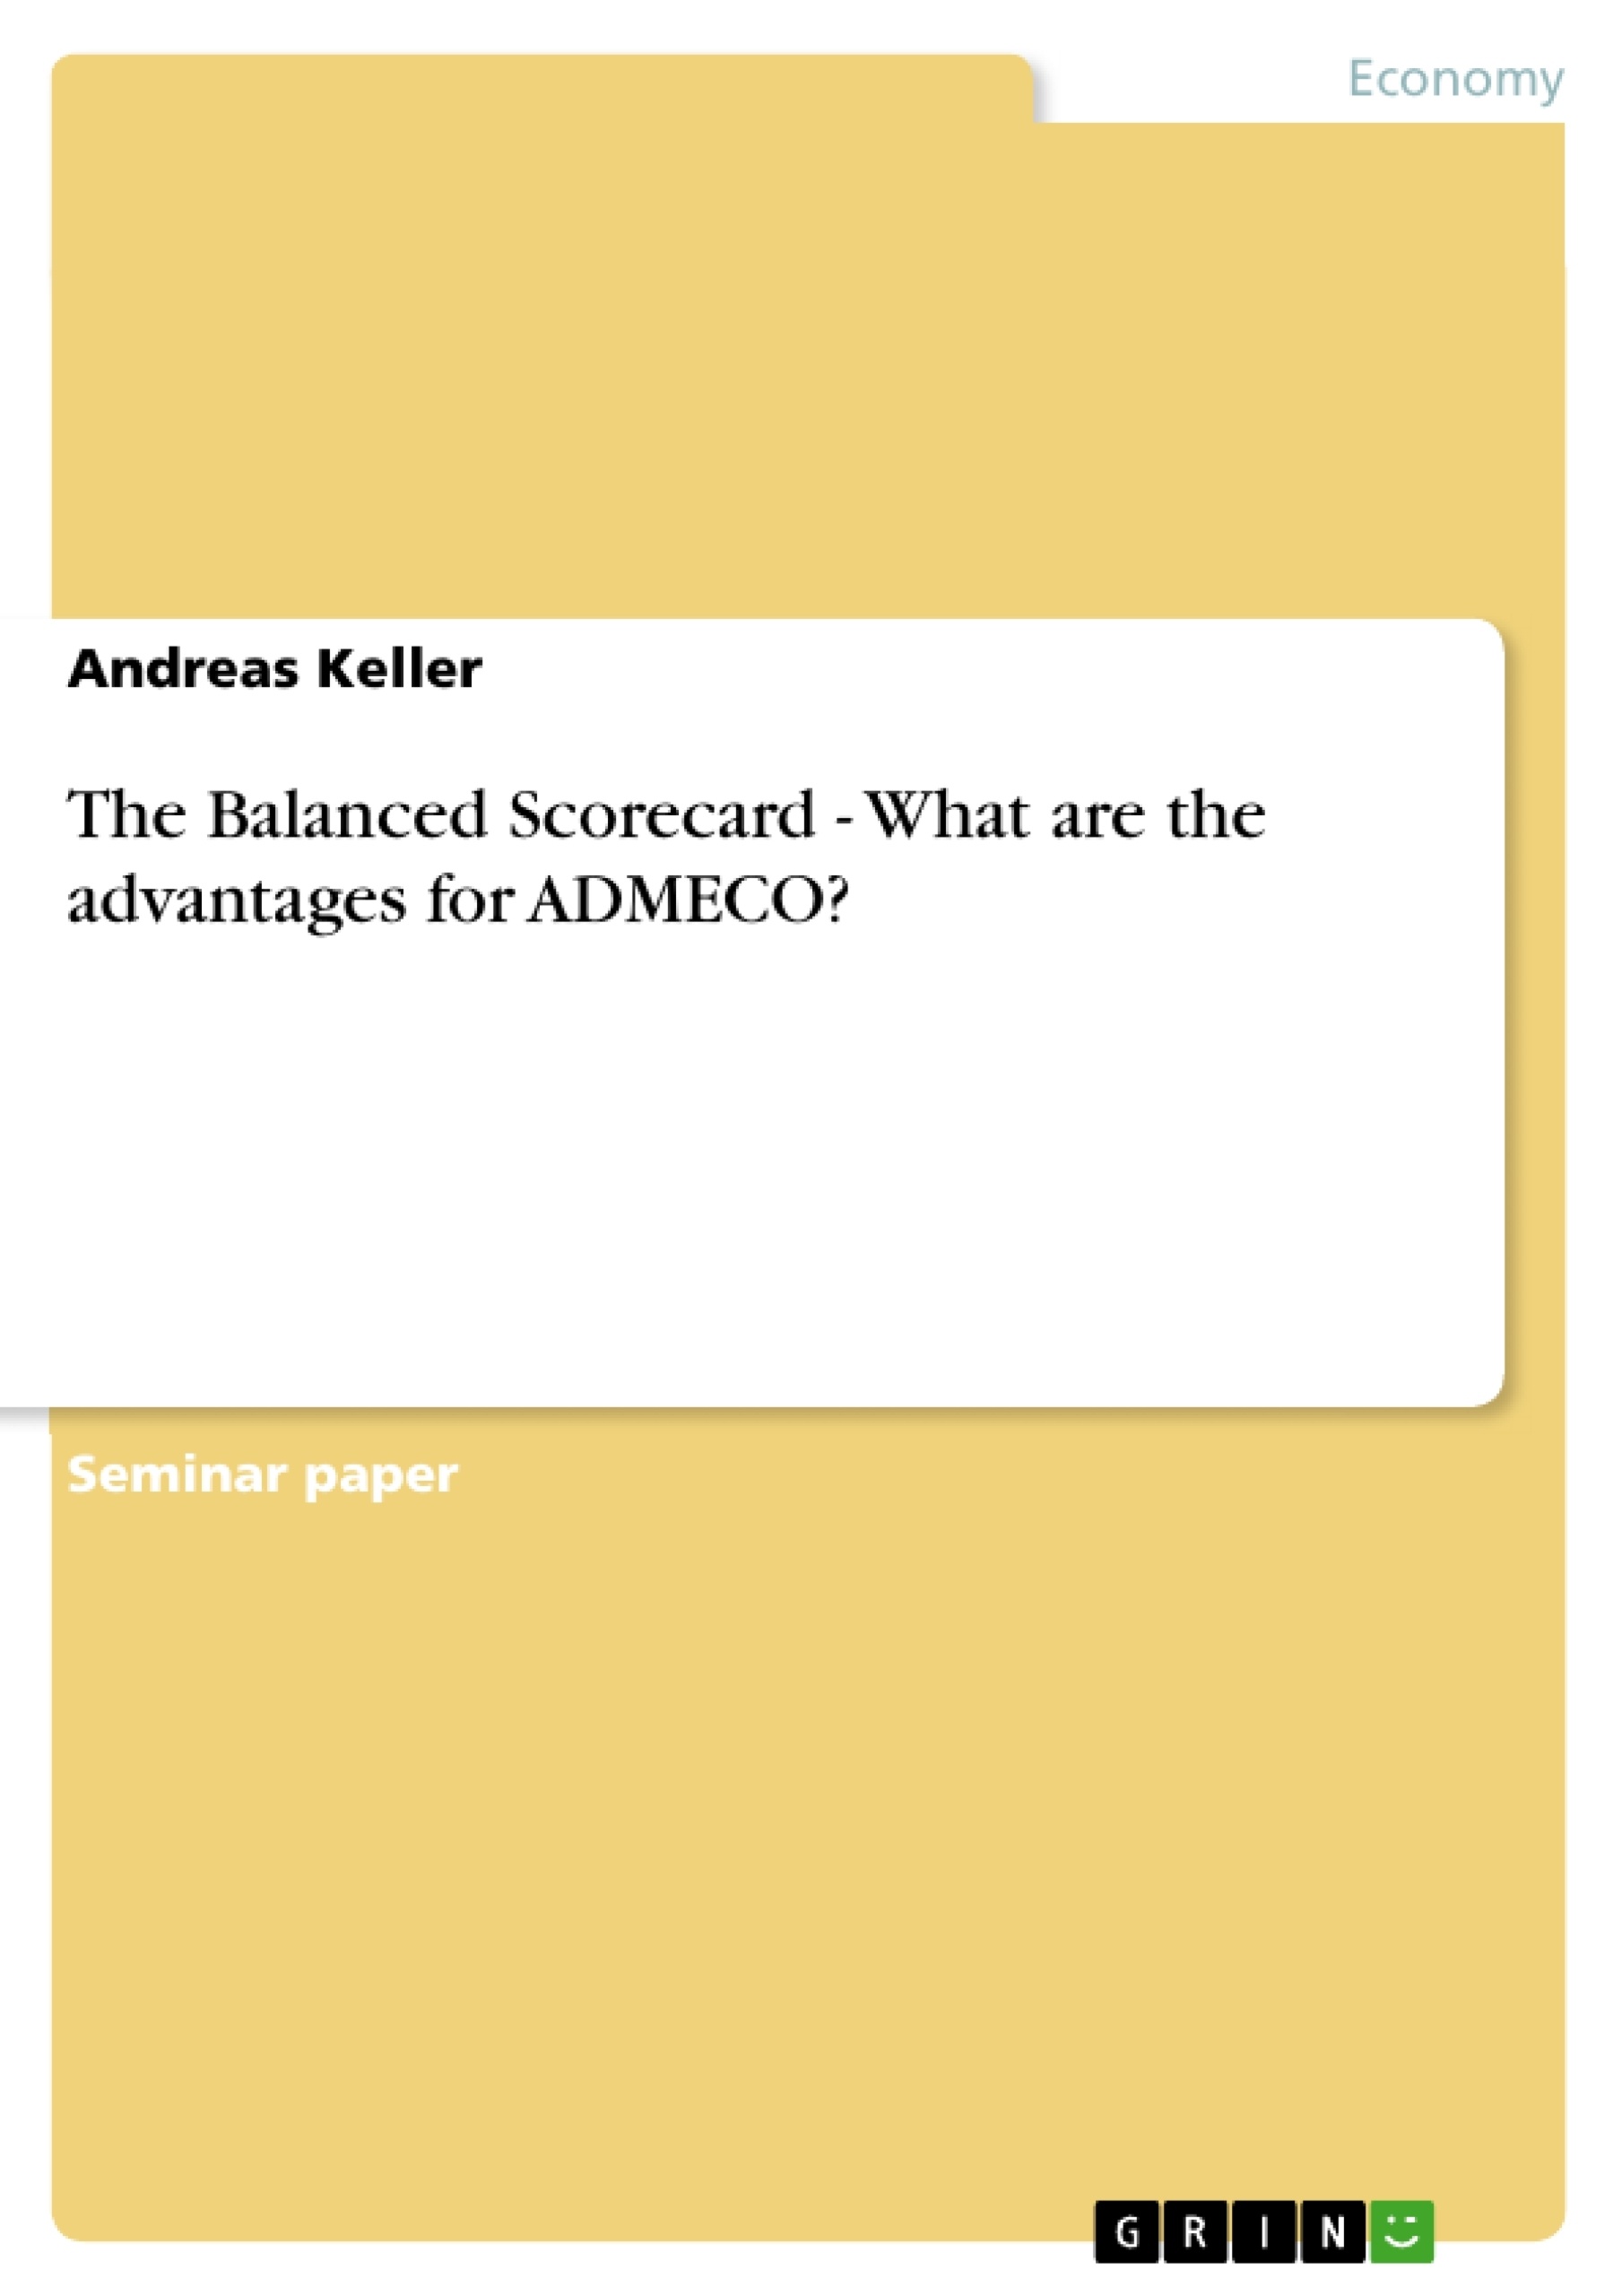 Title: The Balanced Scorecard - What are the advantages for ADMECO?